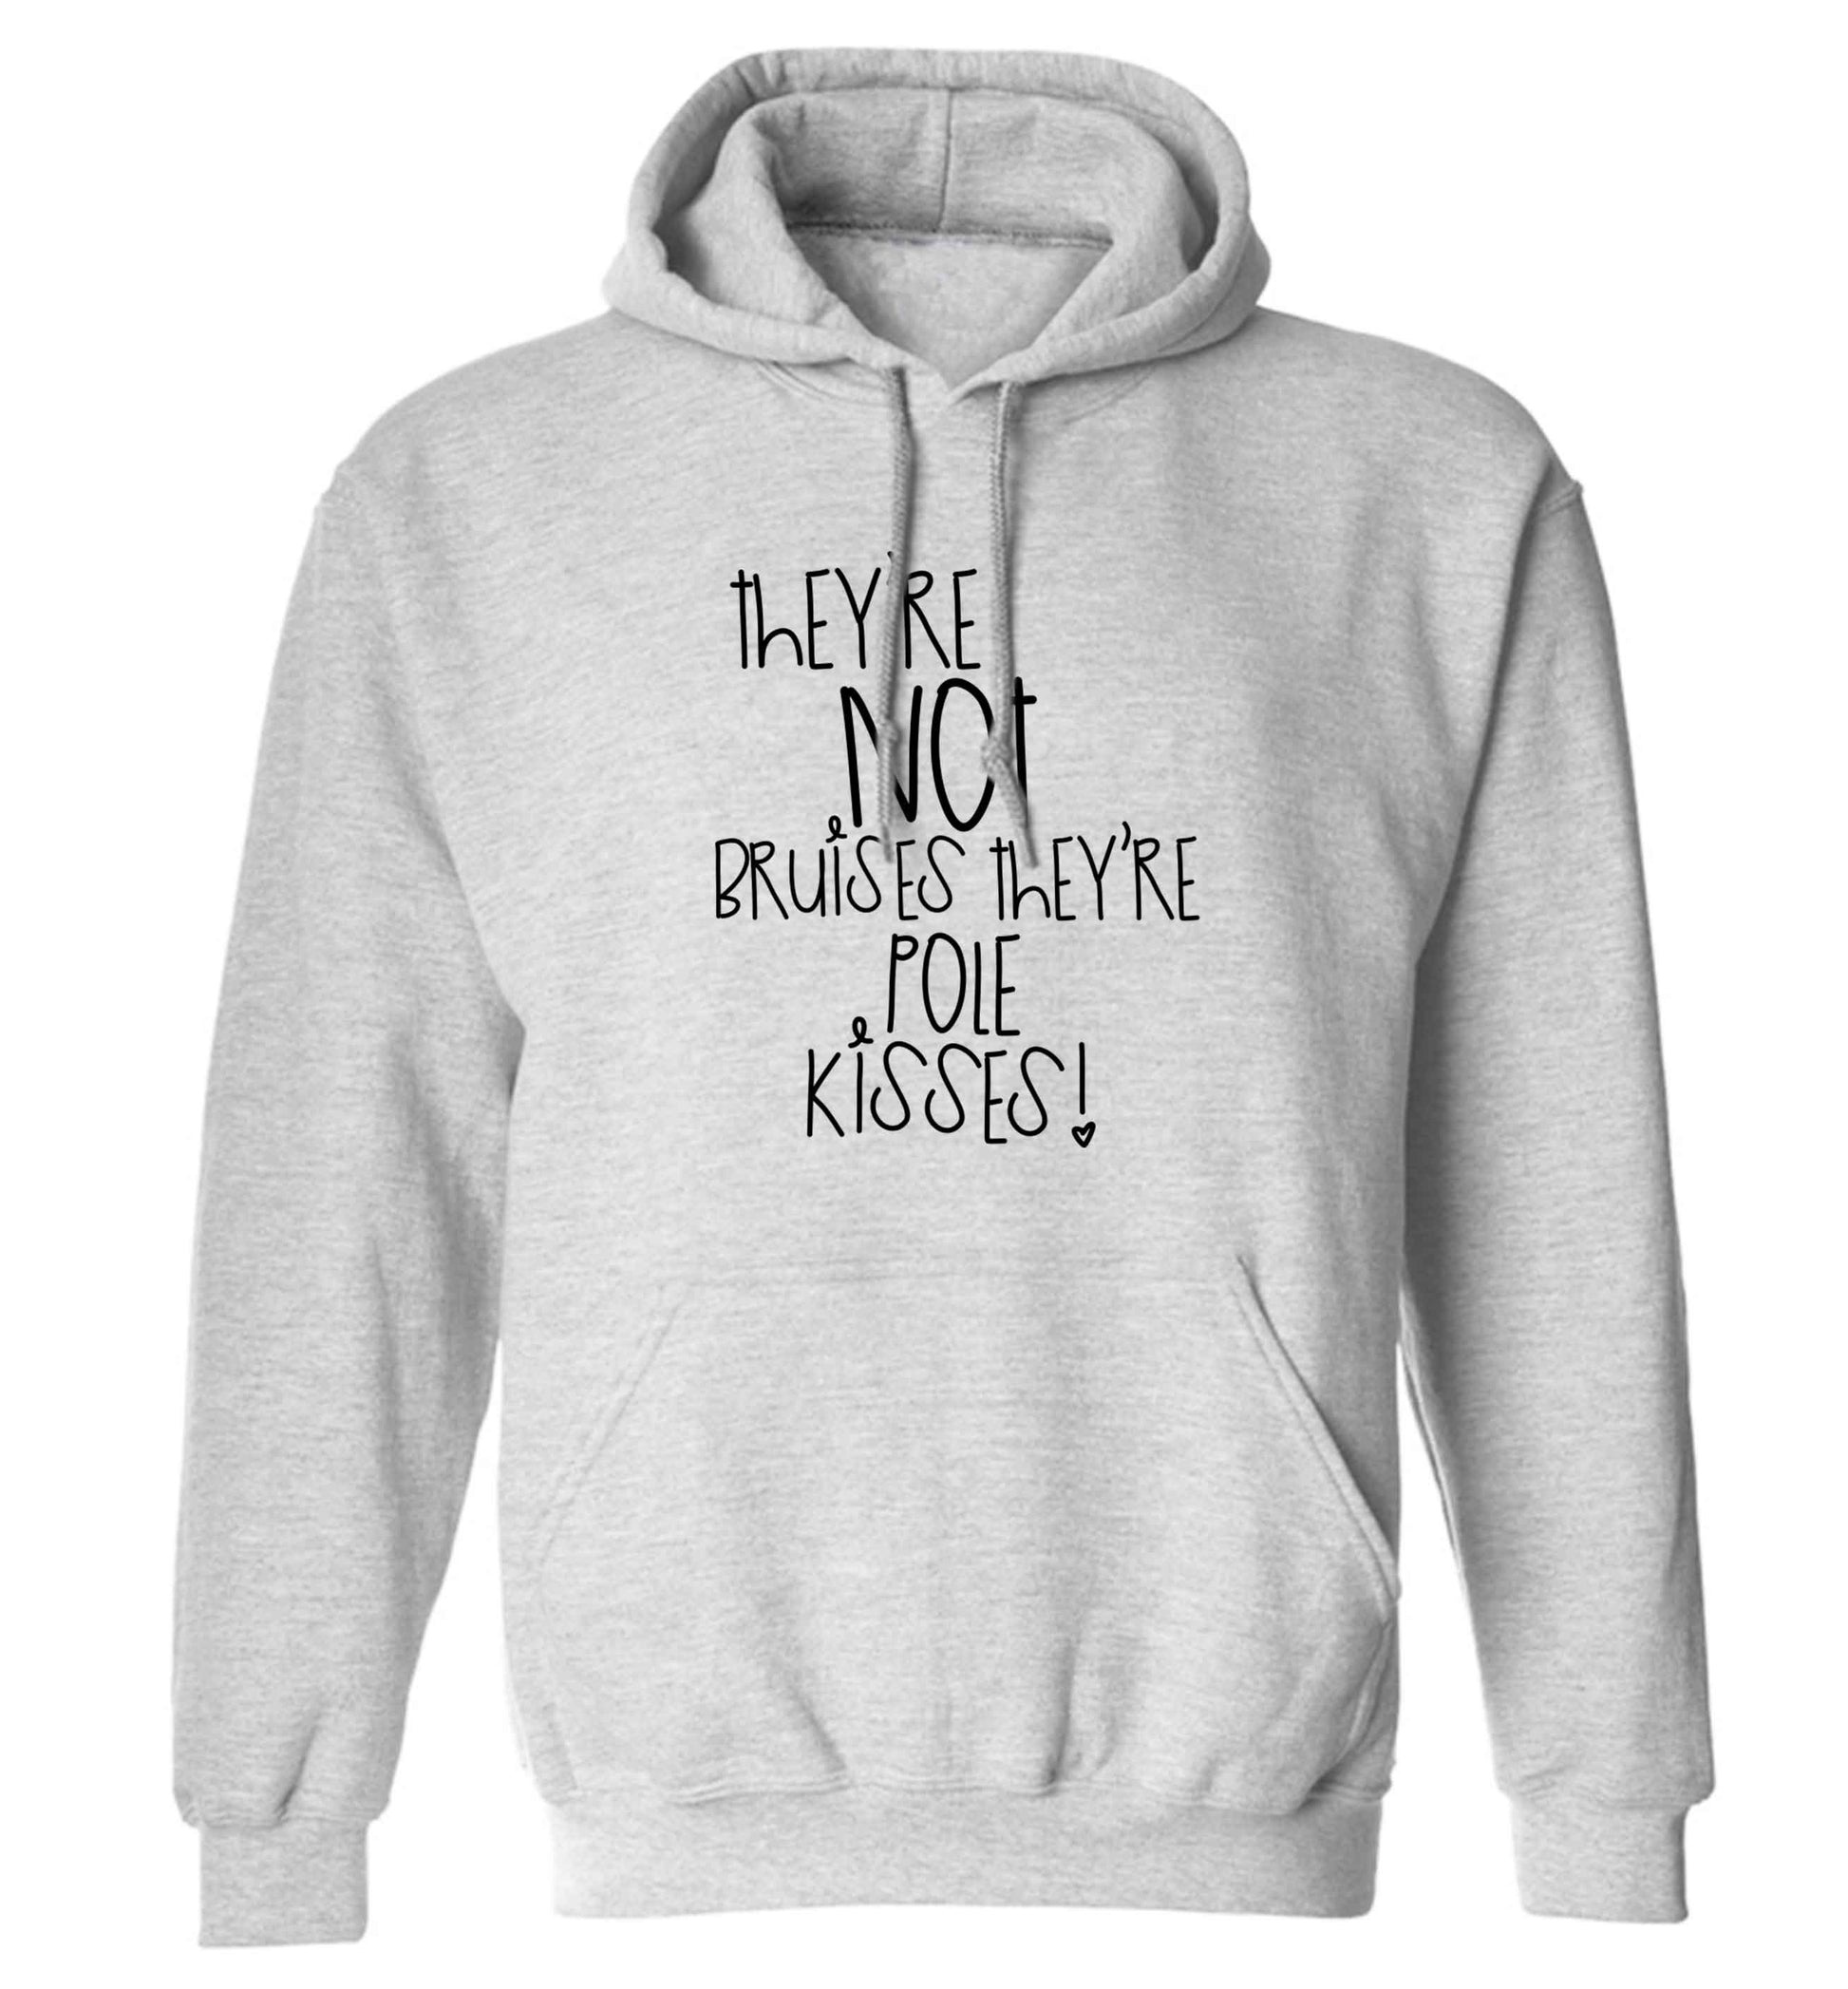 They're not bruises they're pole kisses adults unisex grey hoodie 2XL